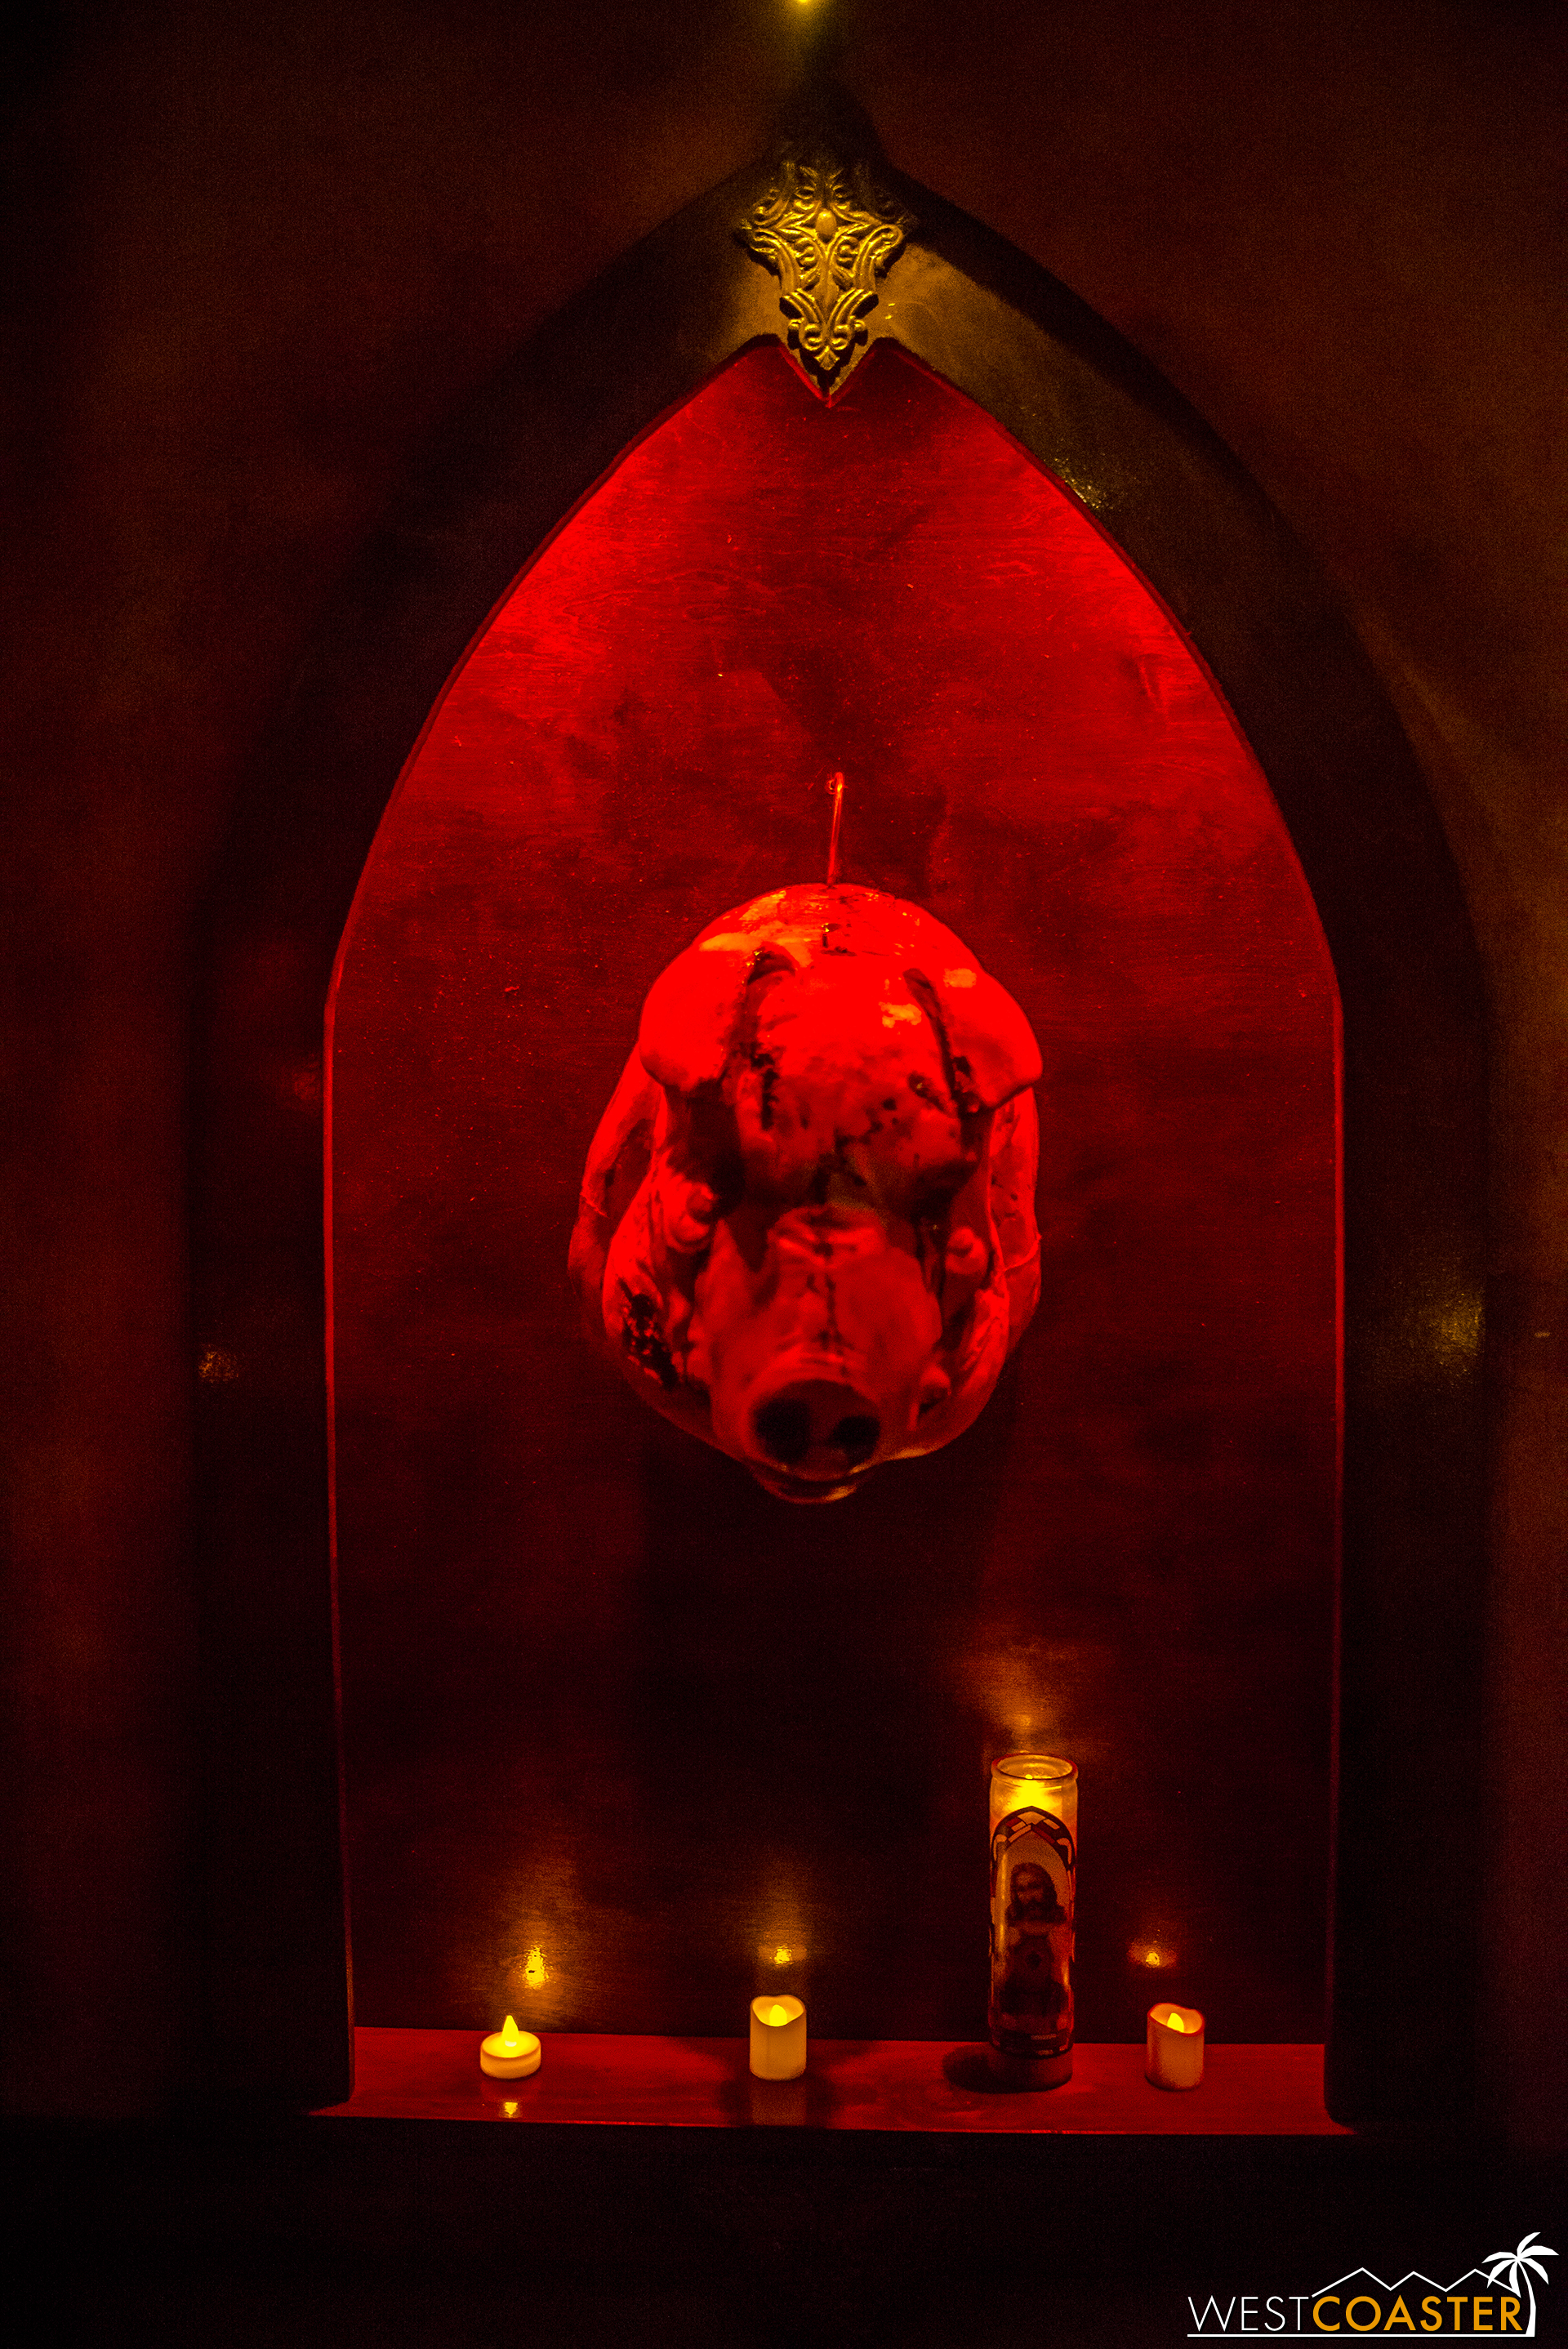  There are also pig heads, continuing the theme and imagery established last year.&nbsp; The pigs represent Paula's demons.   